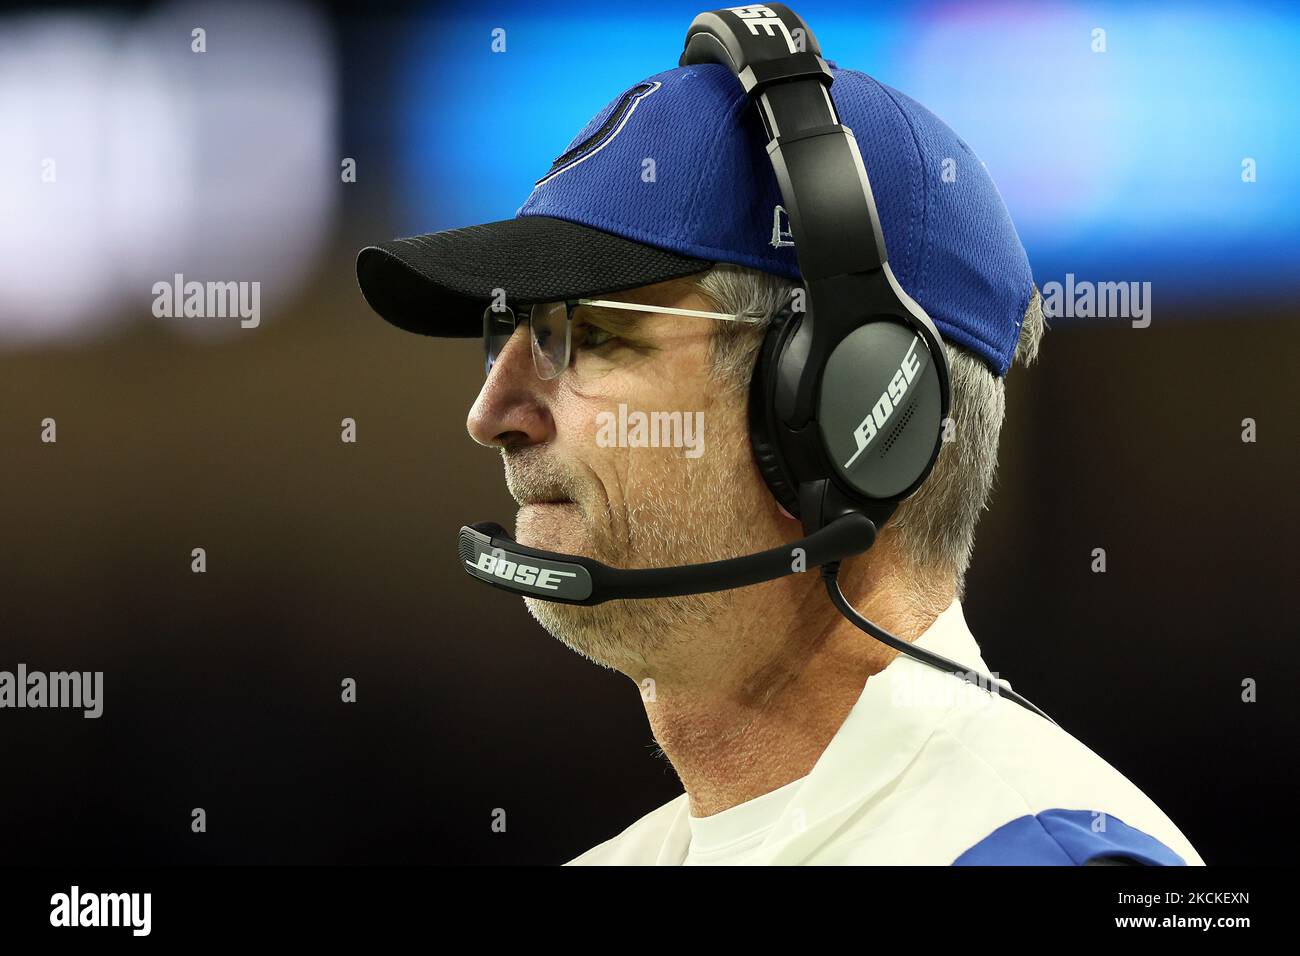 Indianapolis Colts head coach Frank Reich looks on during the first half of an NFL preseason football game between the Detroit Lions and the Indianapolis Colts in Detroit, Michigan USA, on Friday, August 27, 2021. (Photo by Amy Lemus/NurPhoto) Stock Photo